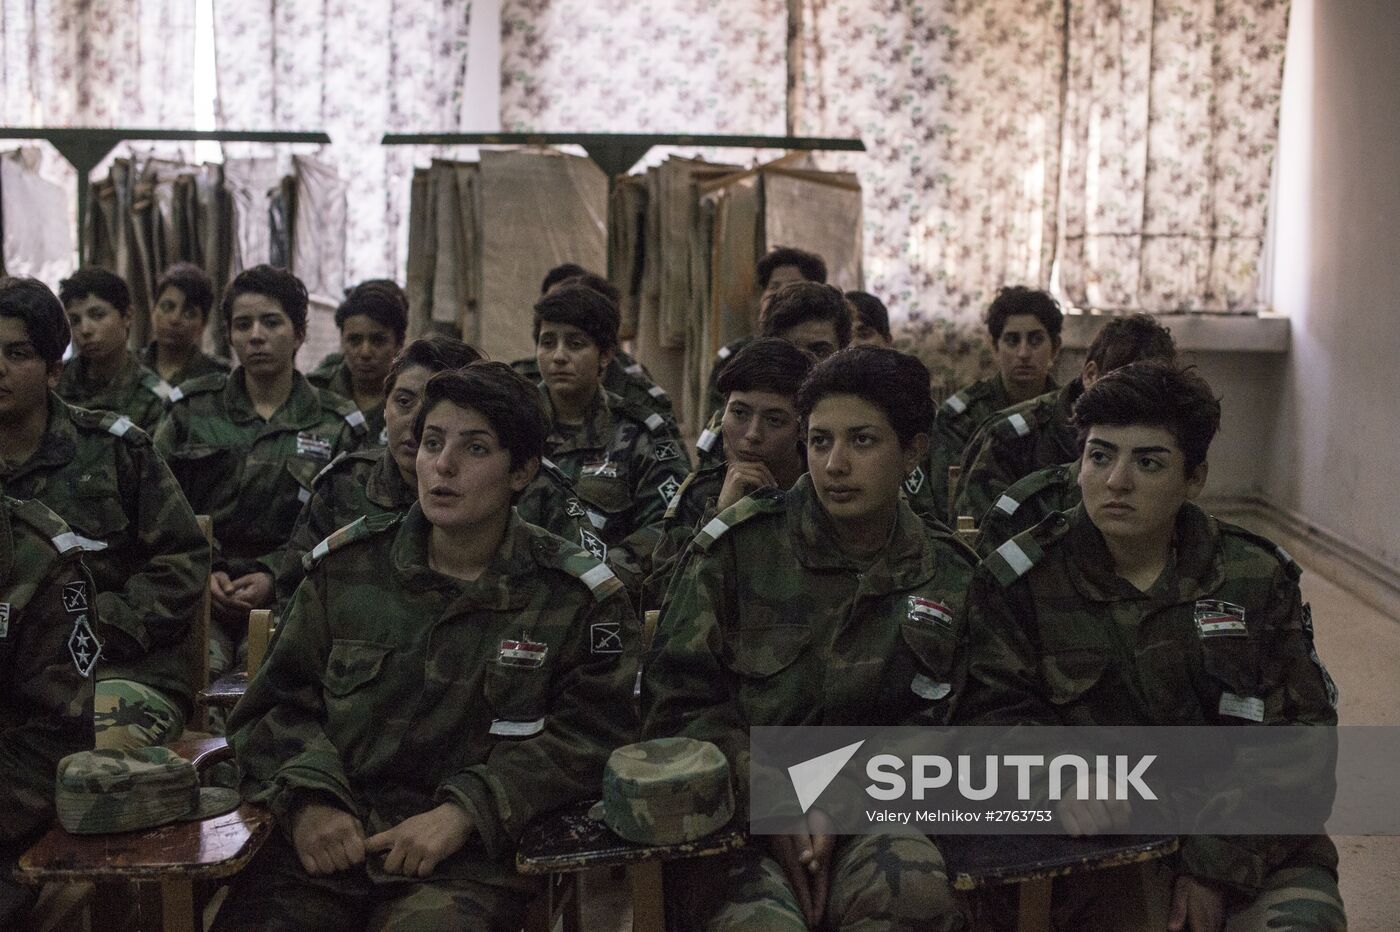 A military academy for women in Damascus